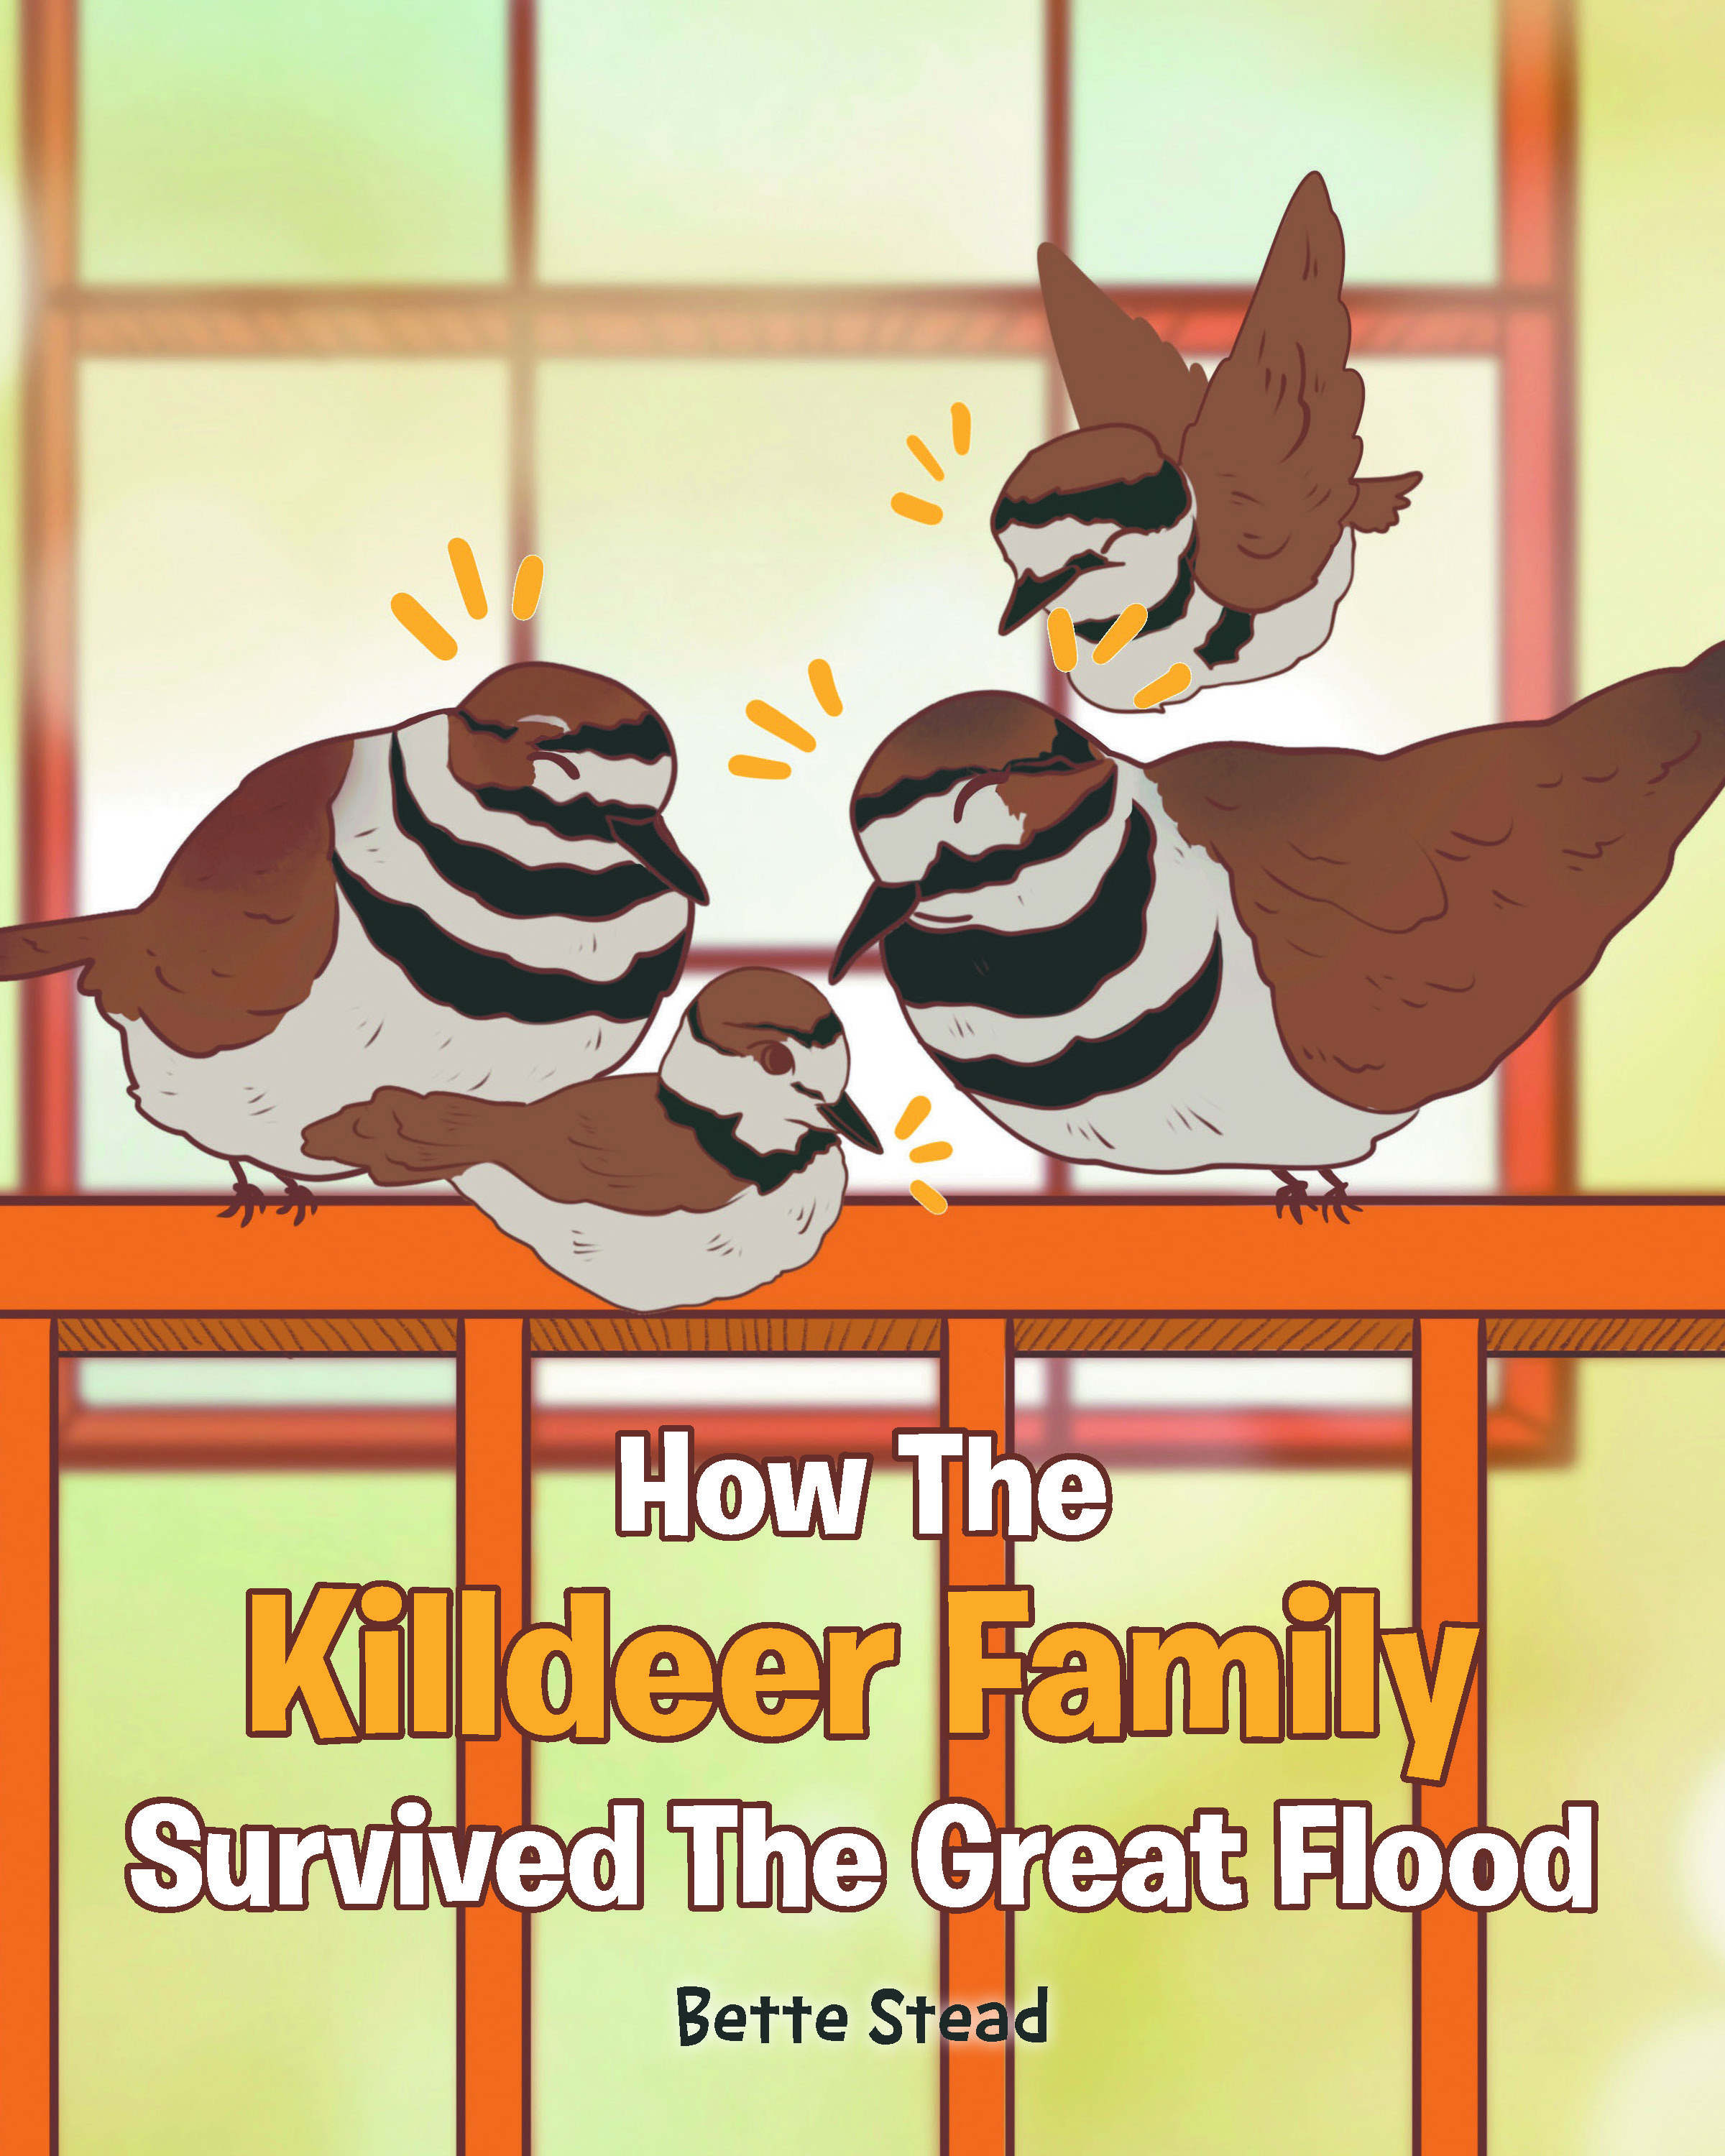 Author Bette Stead’s New Book, “How The Killdeer Family Survived The Great Flood,” Shows That Thanking Those Who Have Helped Others is Always Appreciated